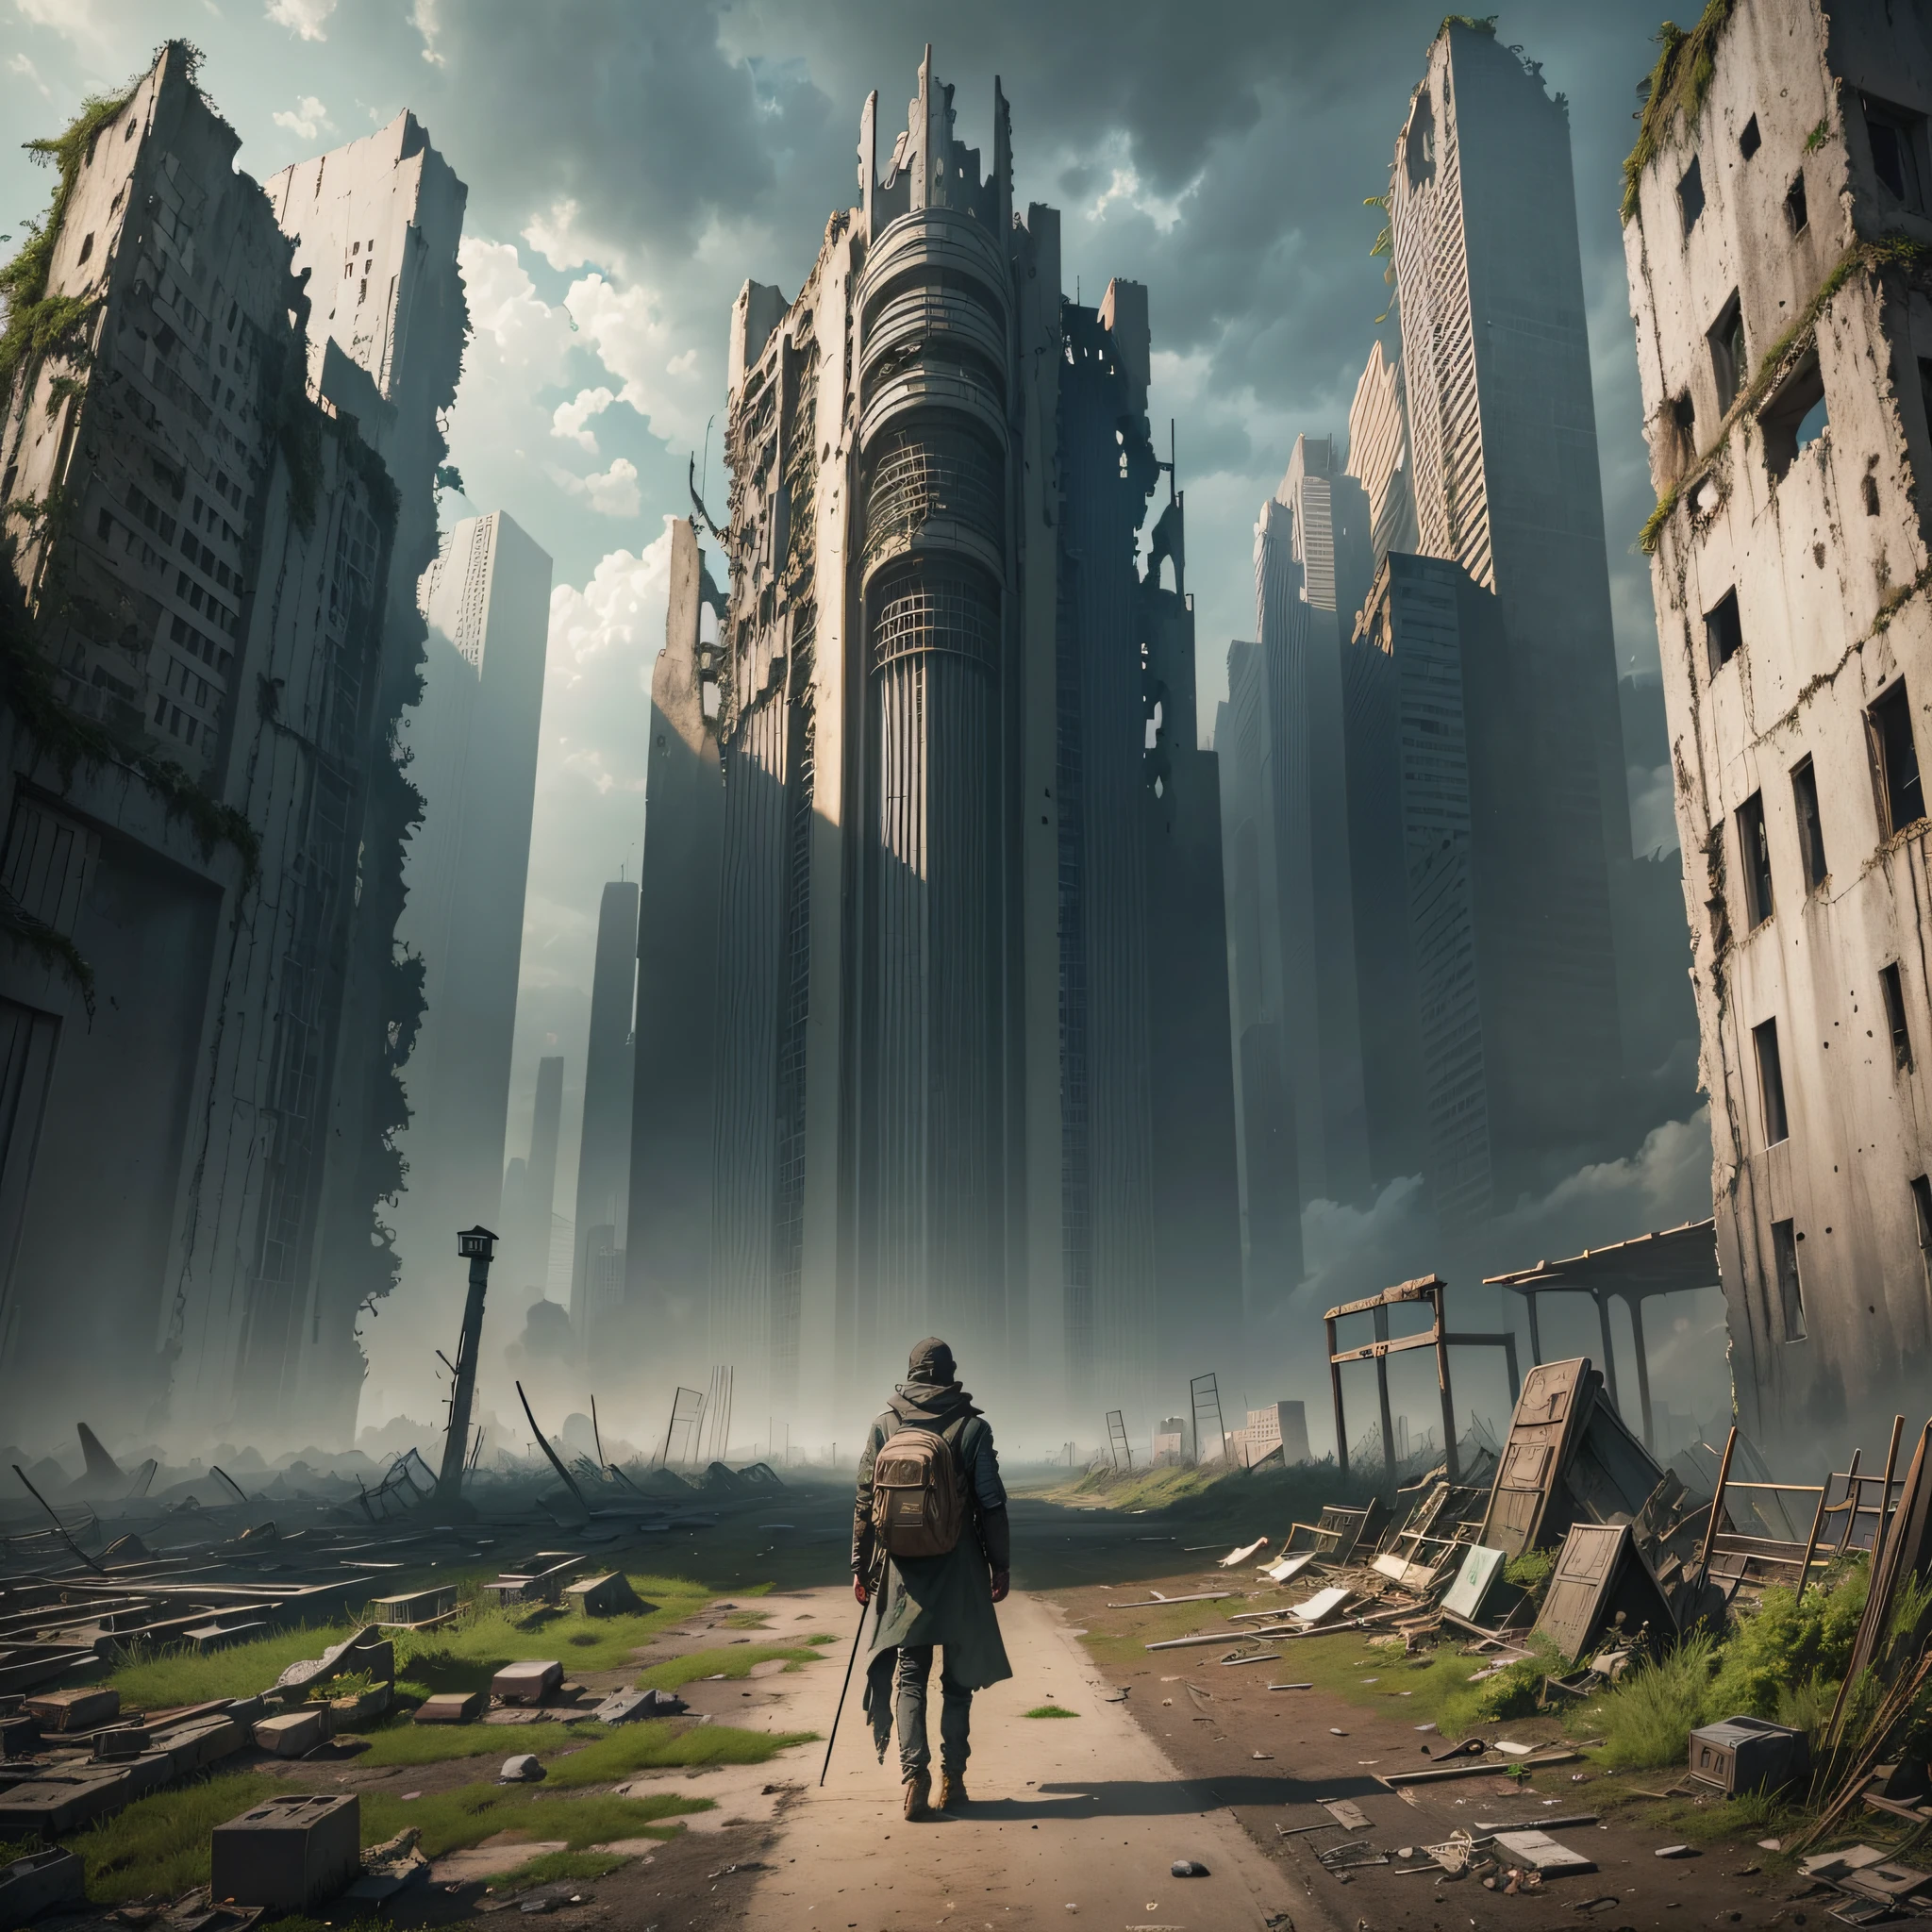 Create an artwork that showcases a desolate, post-apocalyptic world where nature has reclaimed the cities from mankind. The artwork should feature the ruins of a grand city buried under a blanket of overgrown vines and trees, with the impression that years of neglect have created a new ecosystem. The surrounding landscape should depict a gray, somber atmosphere, with a dark sky casting an eerie light over the scene. In the foreground, a lone traveler stands amidst the ruins, dressed in tattered clothing and holding a survival pack. The traveler could be a human or a cyborg. The viewer should feel a sense of both isolation and survival as they contemplate the universe shown in the artwork --auto --s2